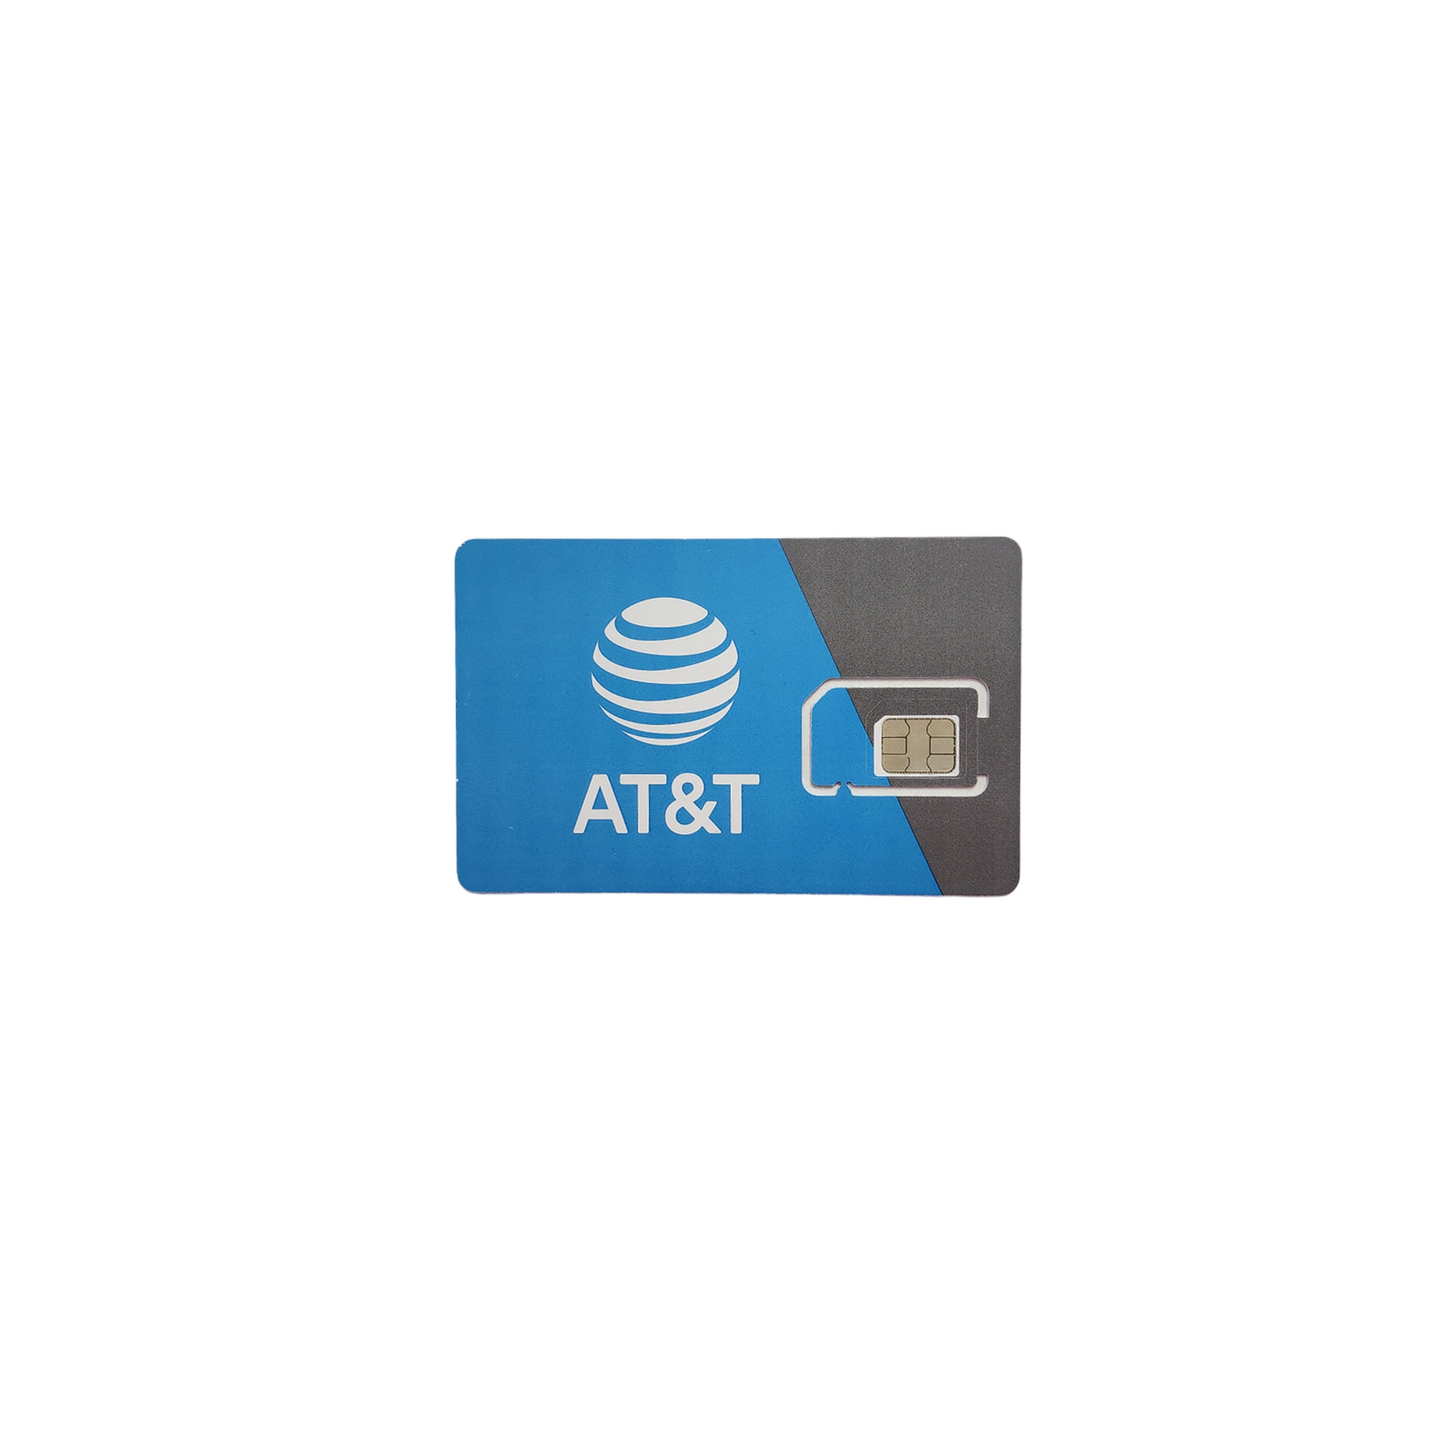 AT&T SIM card three punch front side.